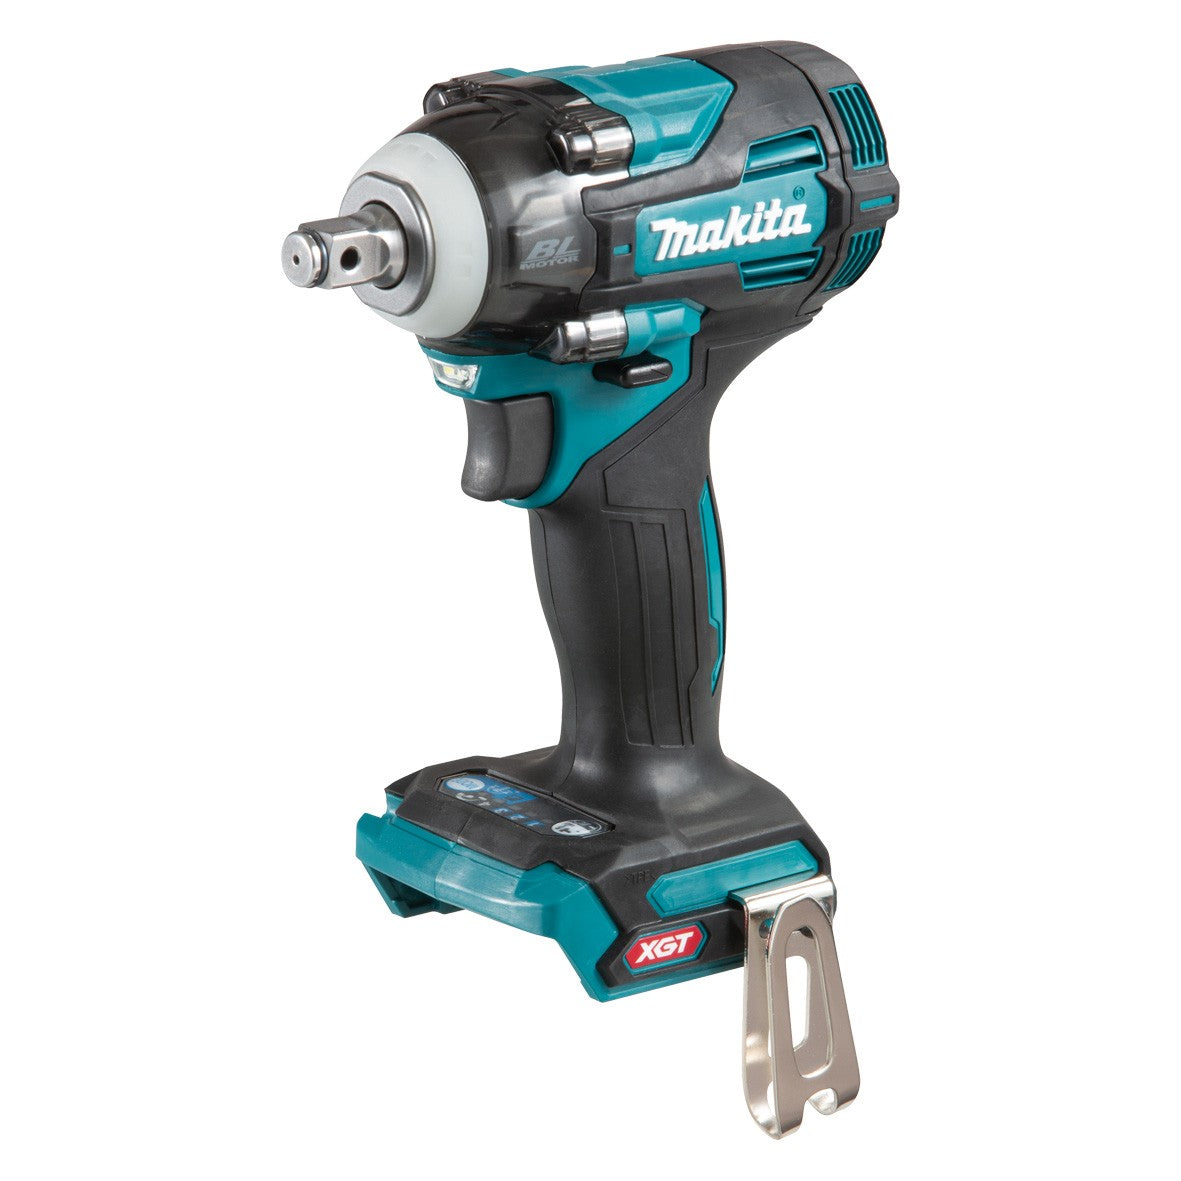 40V 1/2" Brushless Impact Wrench Bare (Tool Only) TW004GZ by Makita